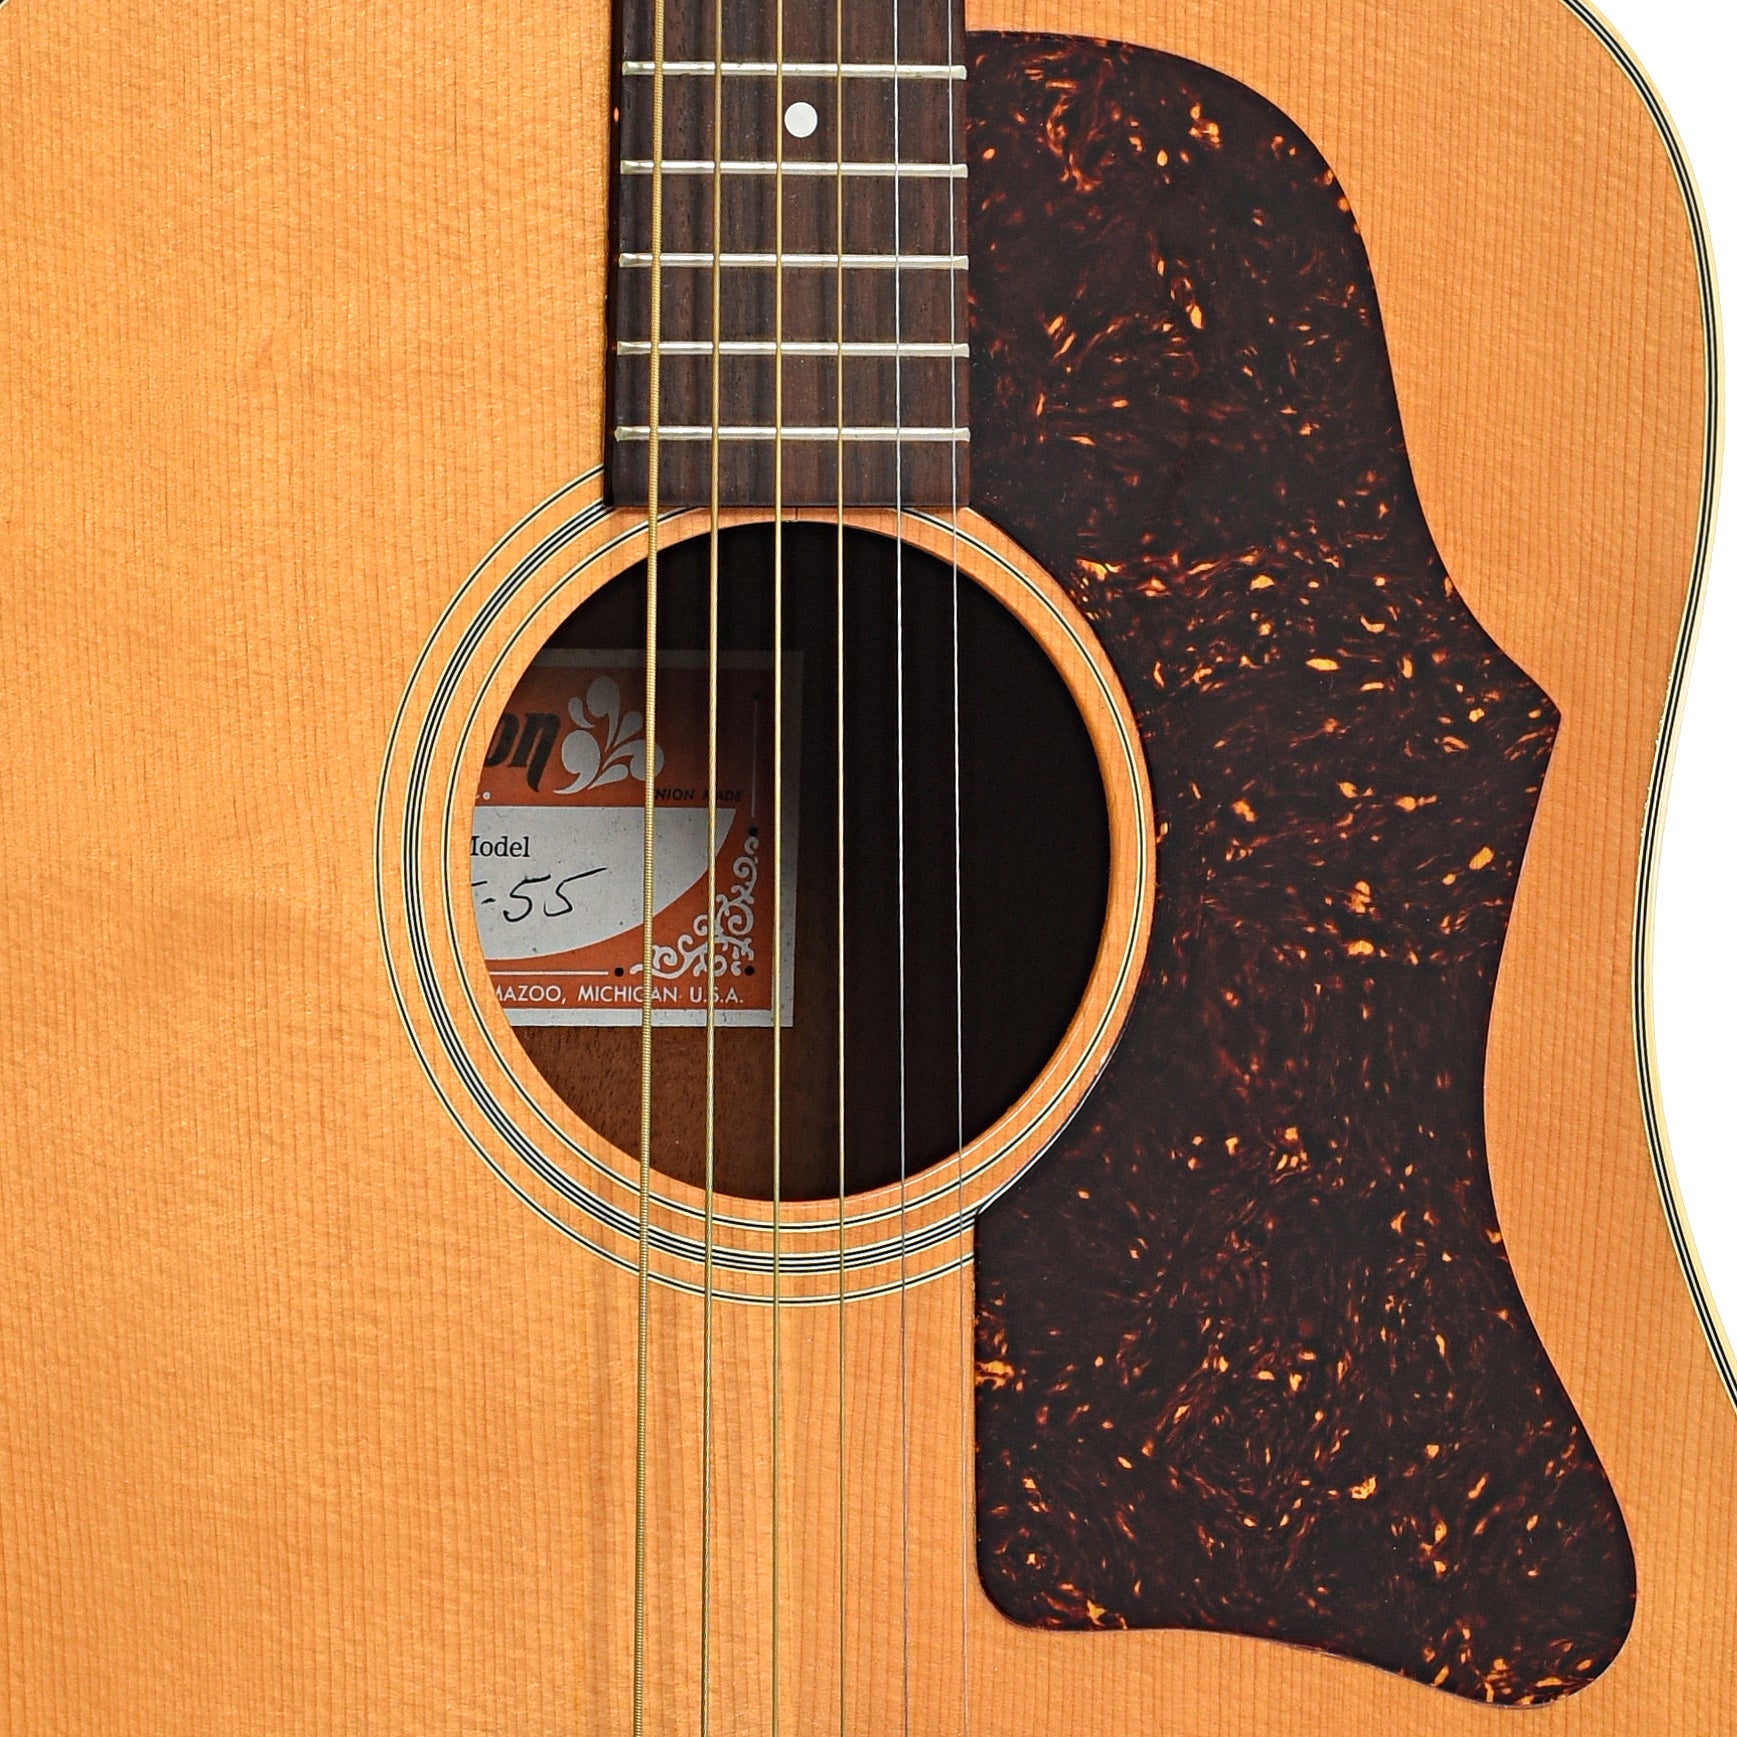 Sound hole and pickguard of Gibson J-55 Acoustic Guitar